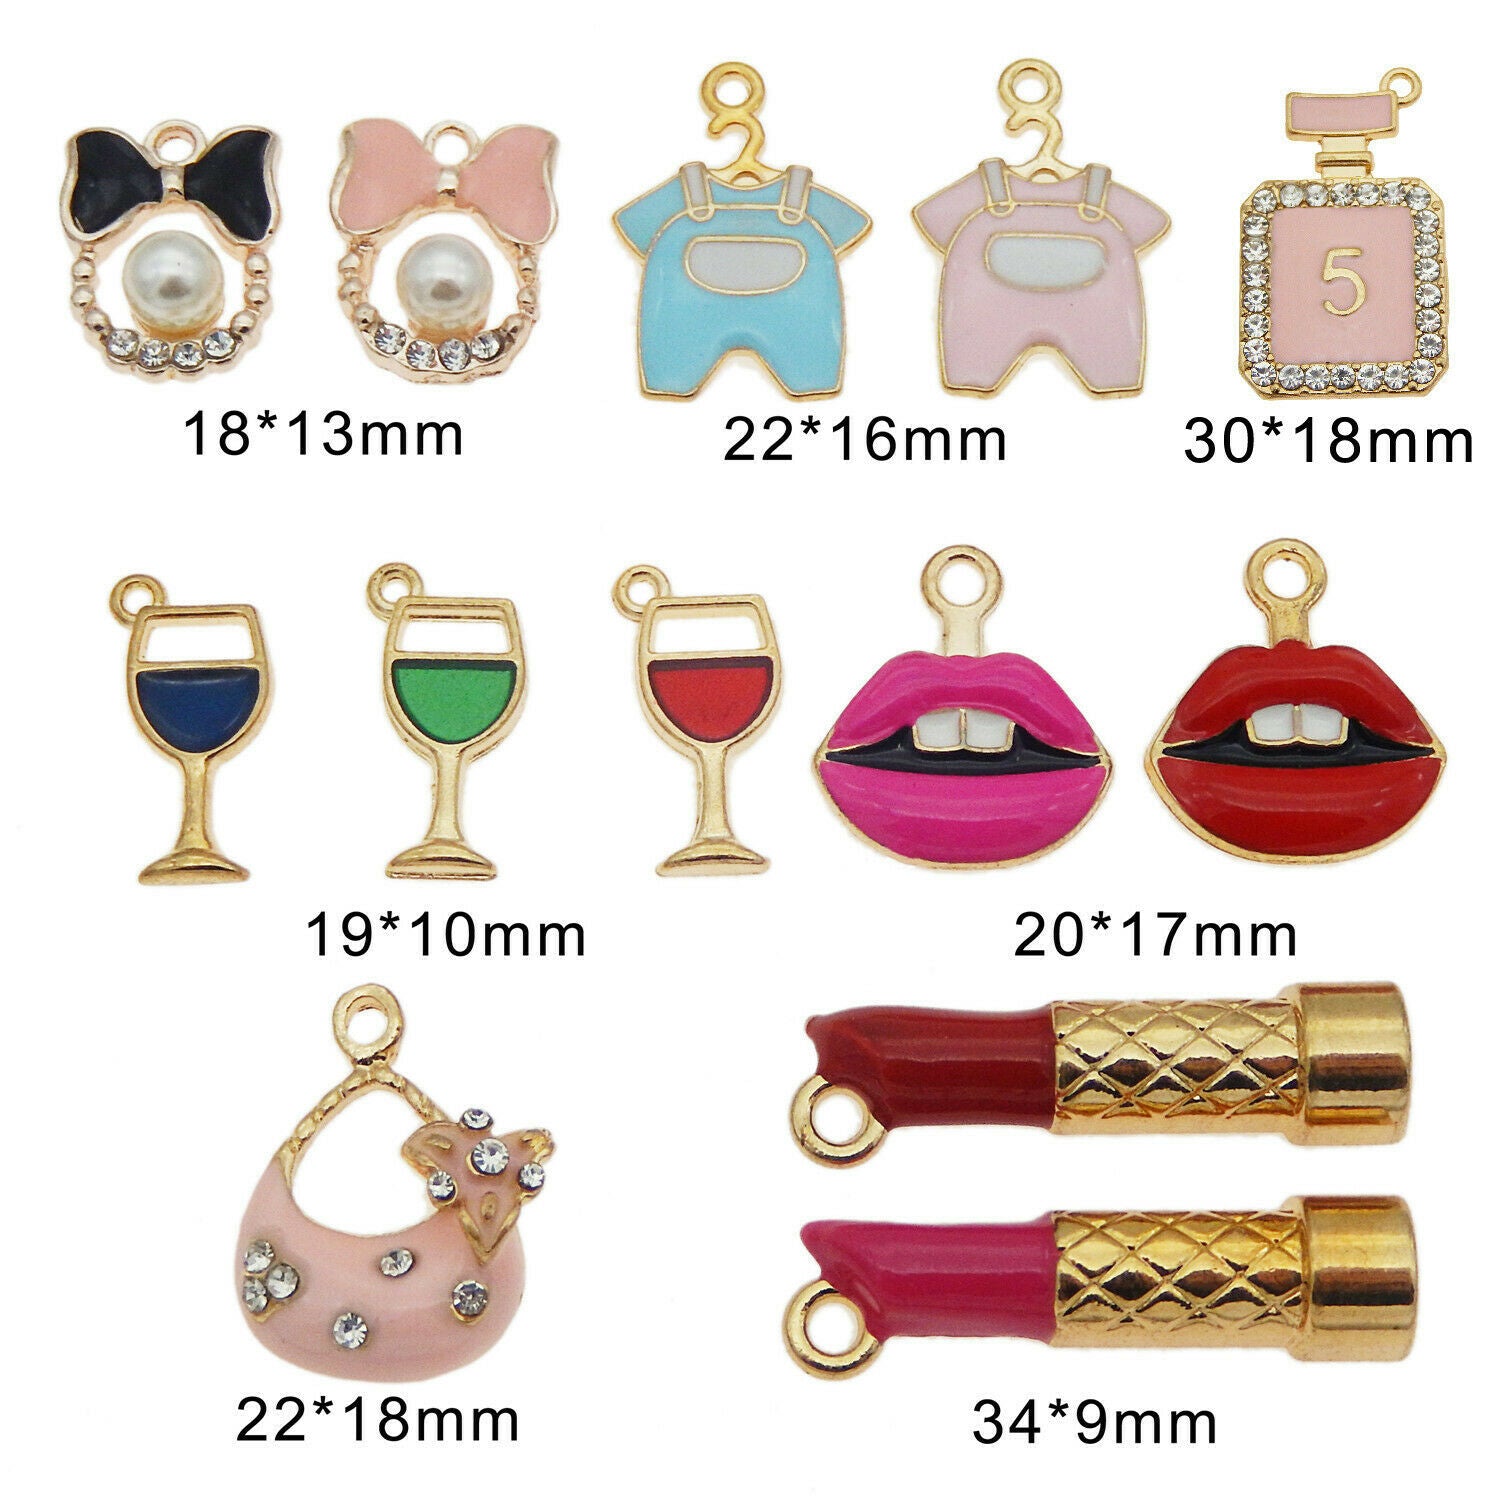 10 Mix Lot Purse Bag Charm Enamel Makeup Accessories DIY Crafting Jewelry Making